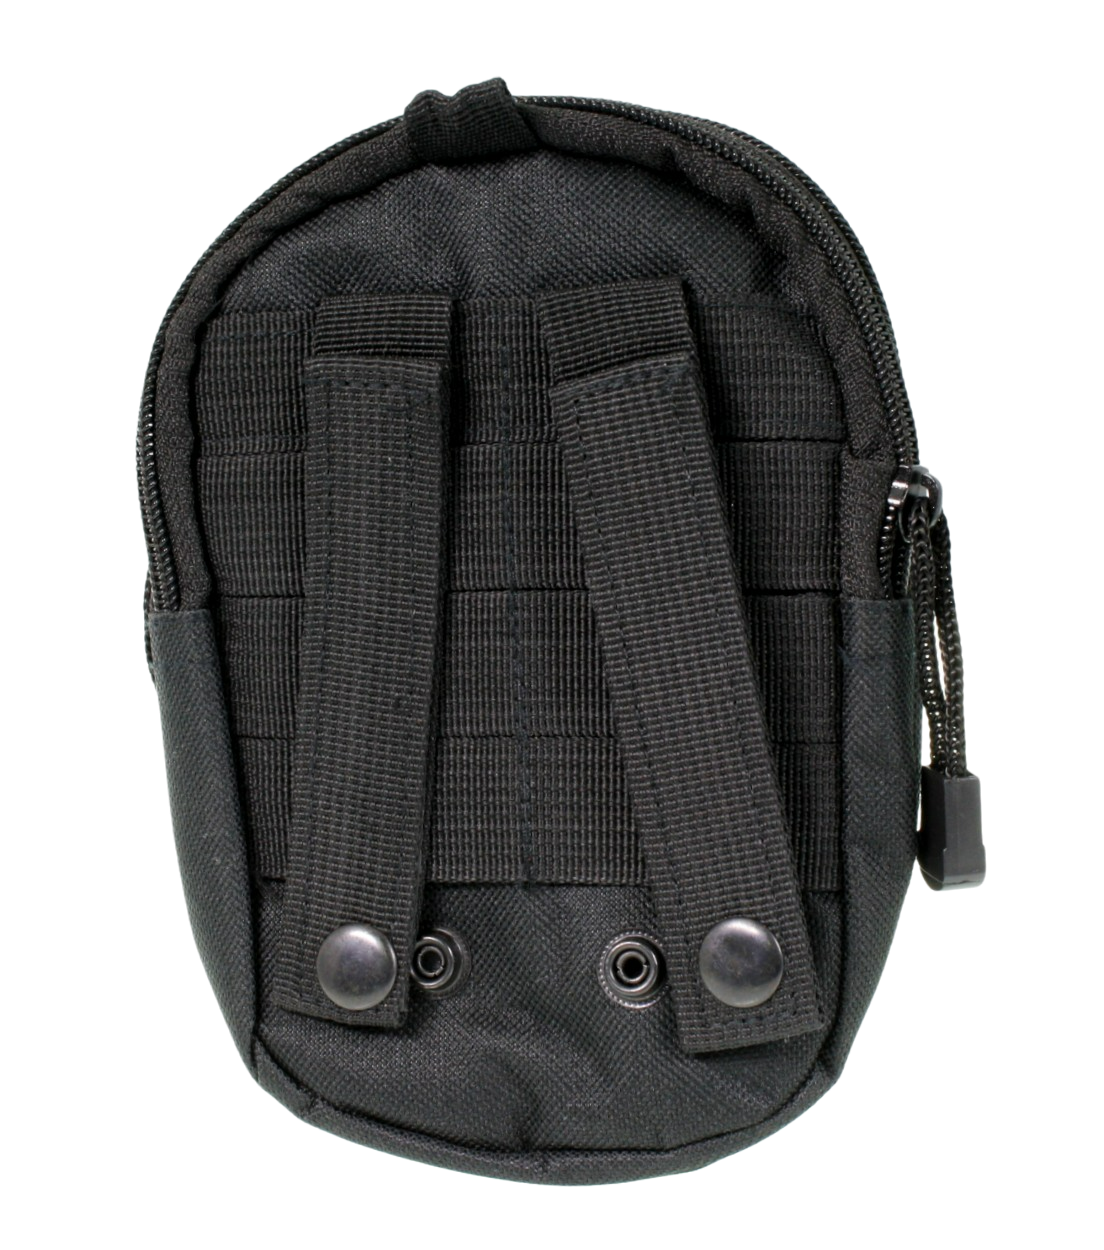 Black pouch, back view showing belt loops undone